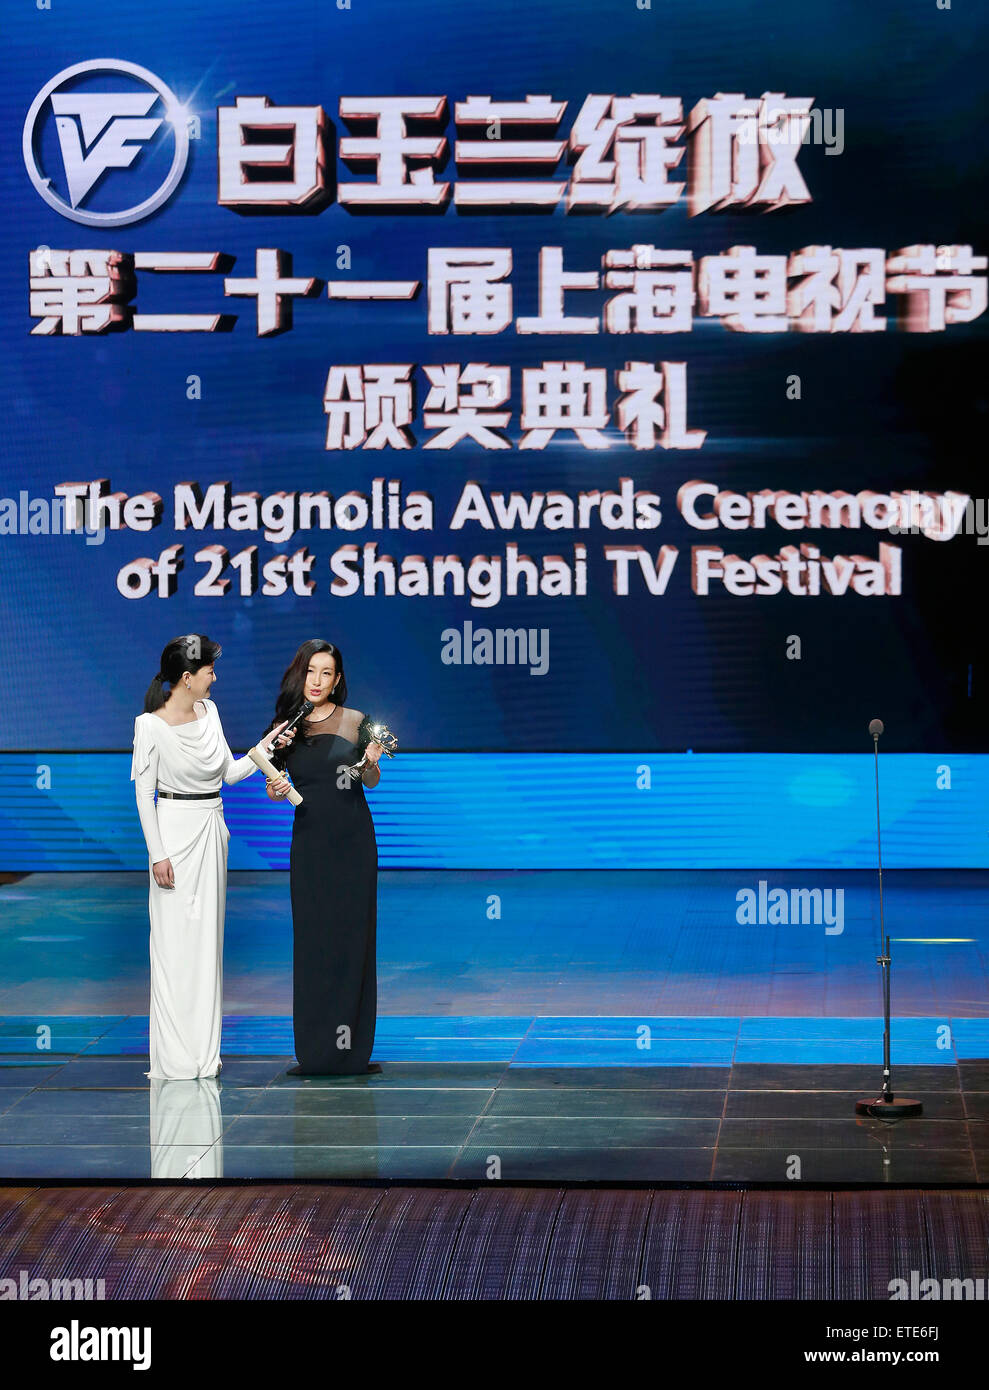 (150612) -- BEIJING, June. 12, 2015 (Xinhua) -- Actress Qin Hailu (R) wins the the Best Supporting Actress award during the 21st Shanghai Television Festival in east China's Shanghai Municipality, June 12, 2012. The 21st Shanghai Television Festival closed in Shanghai Friday. (Xinhua/Ding Ting) (yxb) Stock Photo